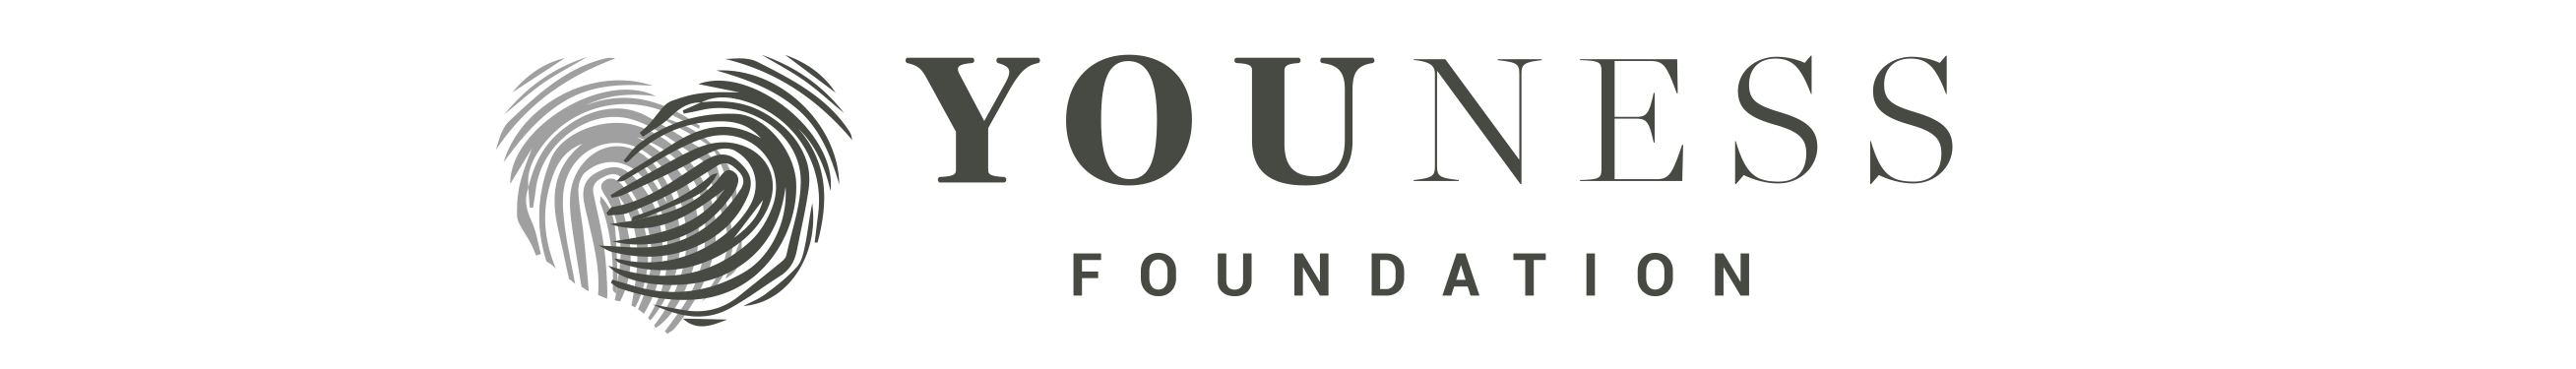 Youness Foundation